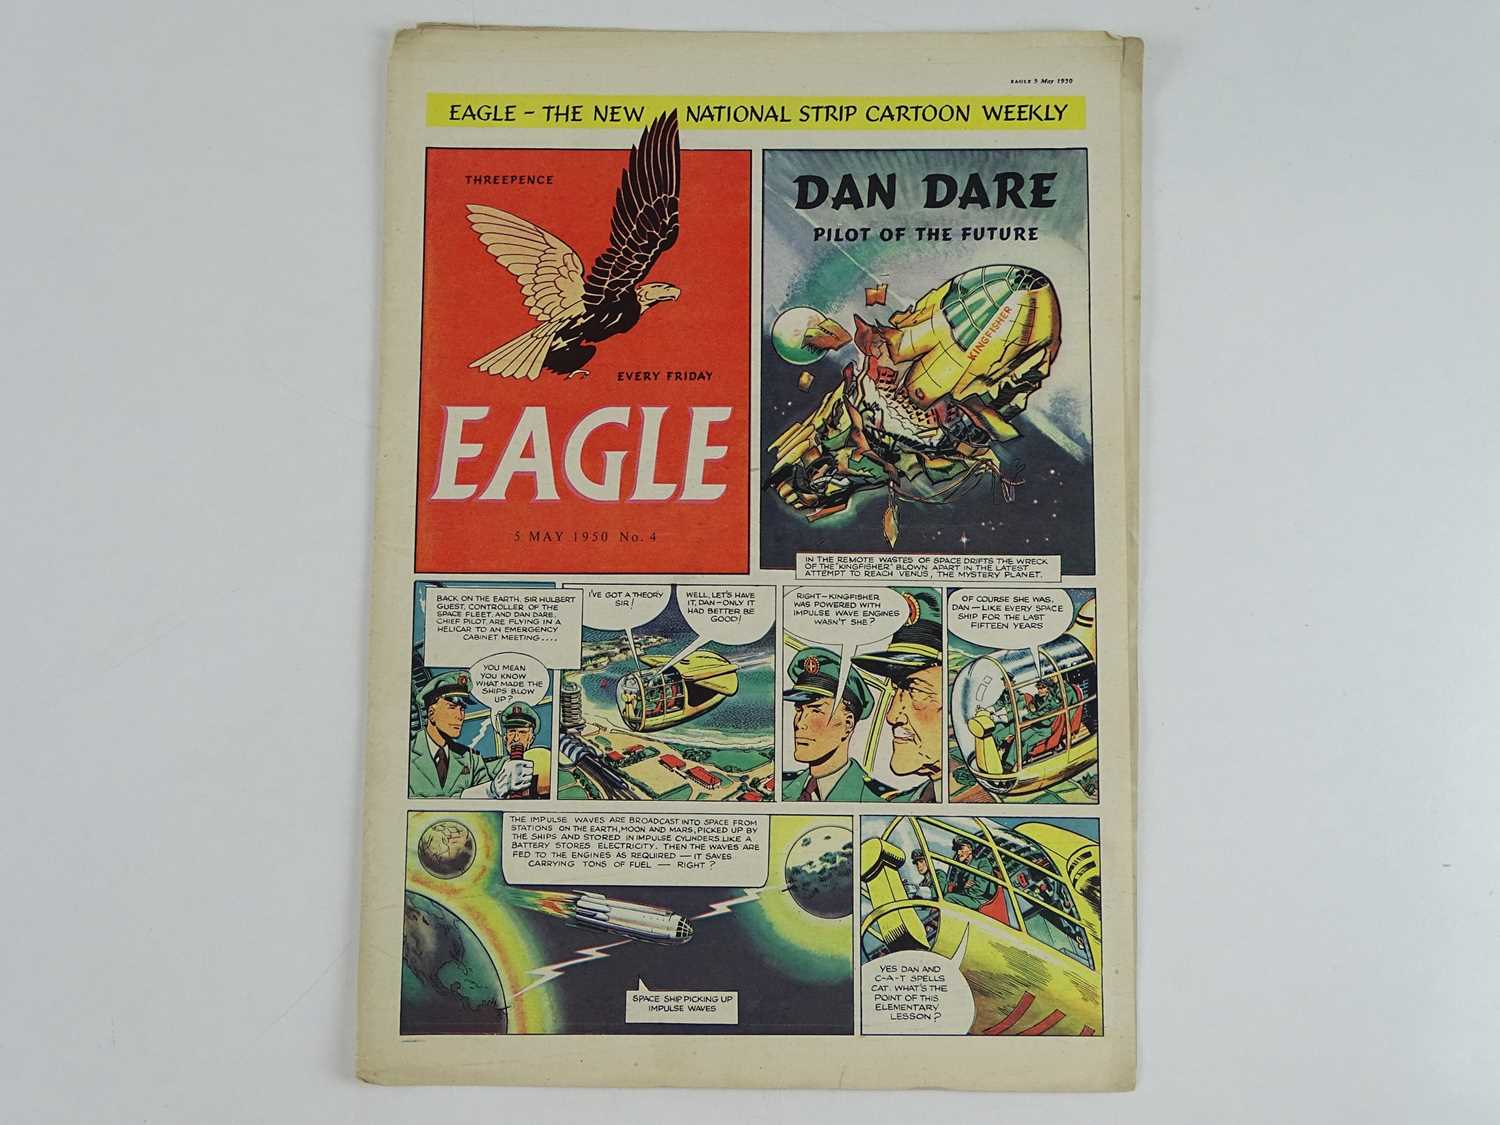 EAGLE COMIC LOT (53 in Lot) - (1950 - Hulton Press / IPC Magazines) Includes complete Fifty-Two (52) - Image 8 of 8